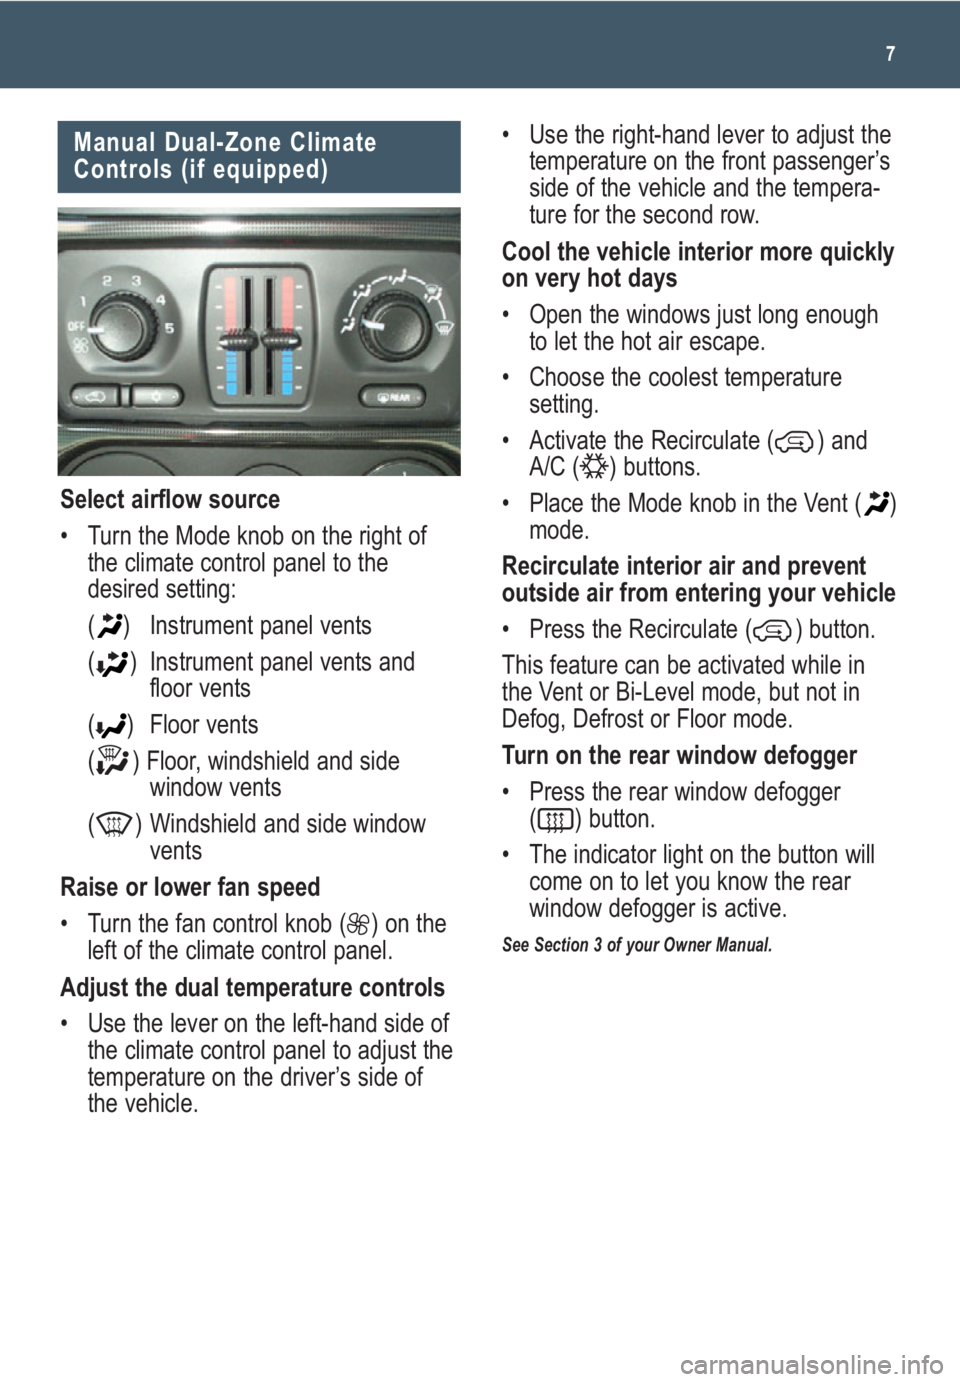 GMC ENVOY 2009  Get To Know Guide 7
Manual Dual-Zone Climate
Controls (if equipped)
Select airflow source
• Turn the Mode knob on the right of
the climate control panel to the
desired setting:
( )  Instrument panel vents
( )  Instru